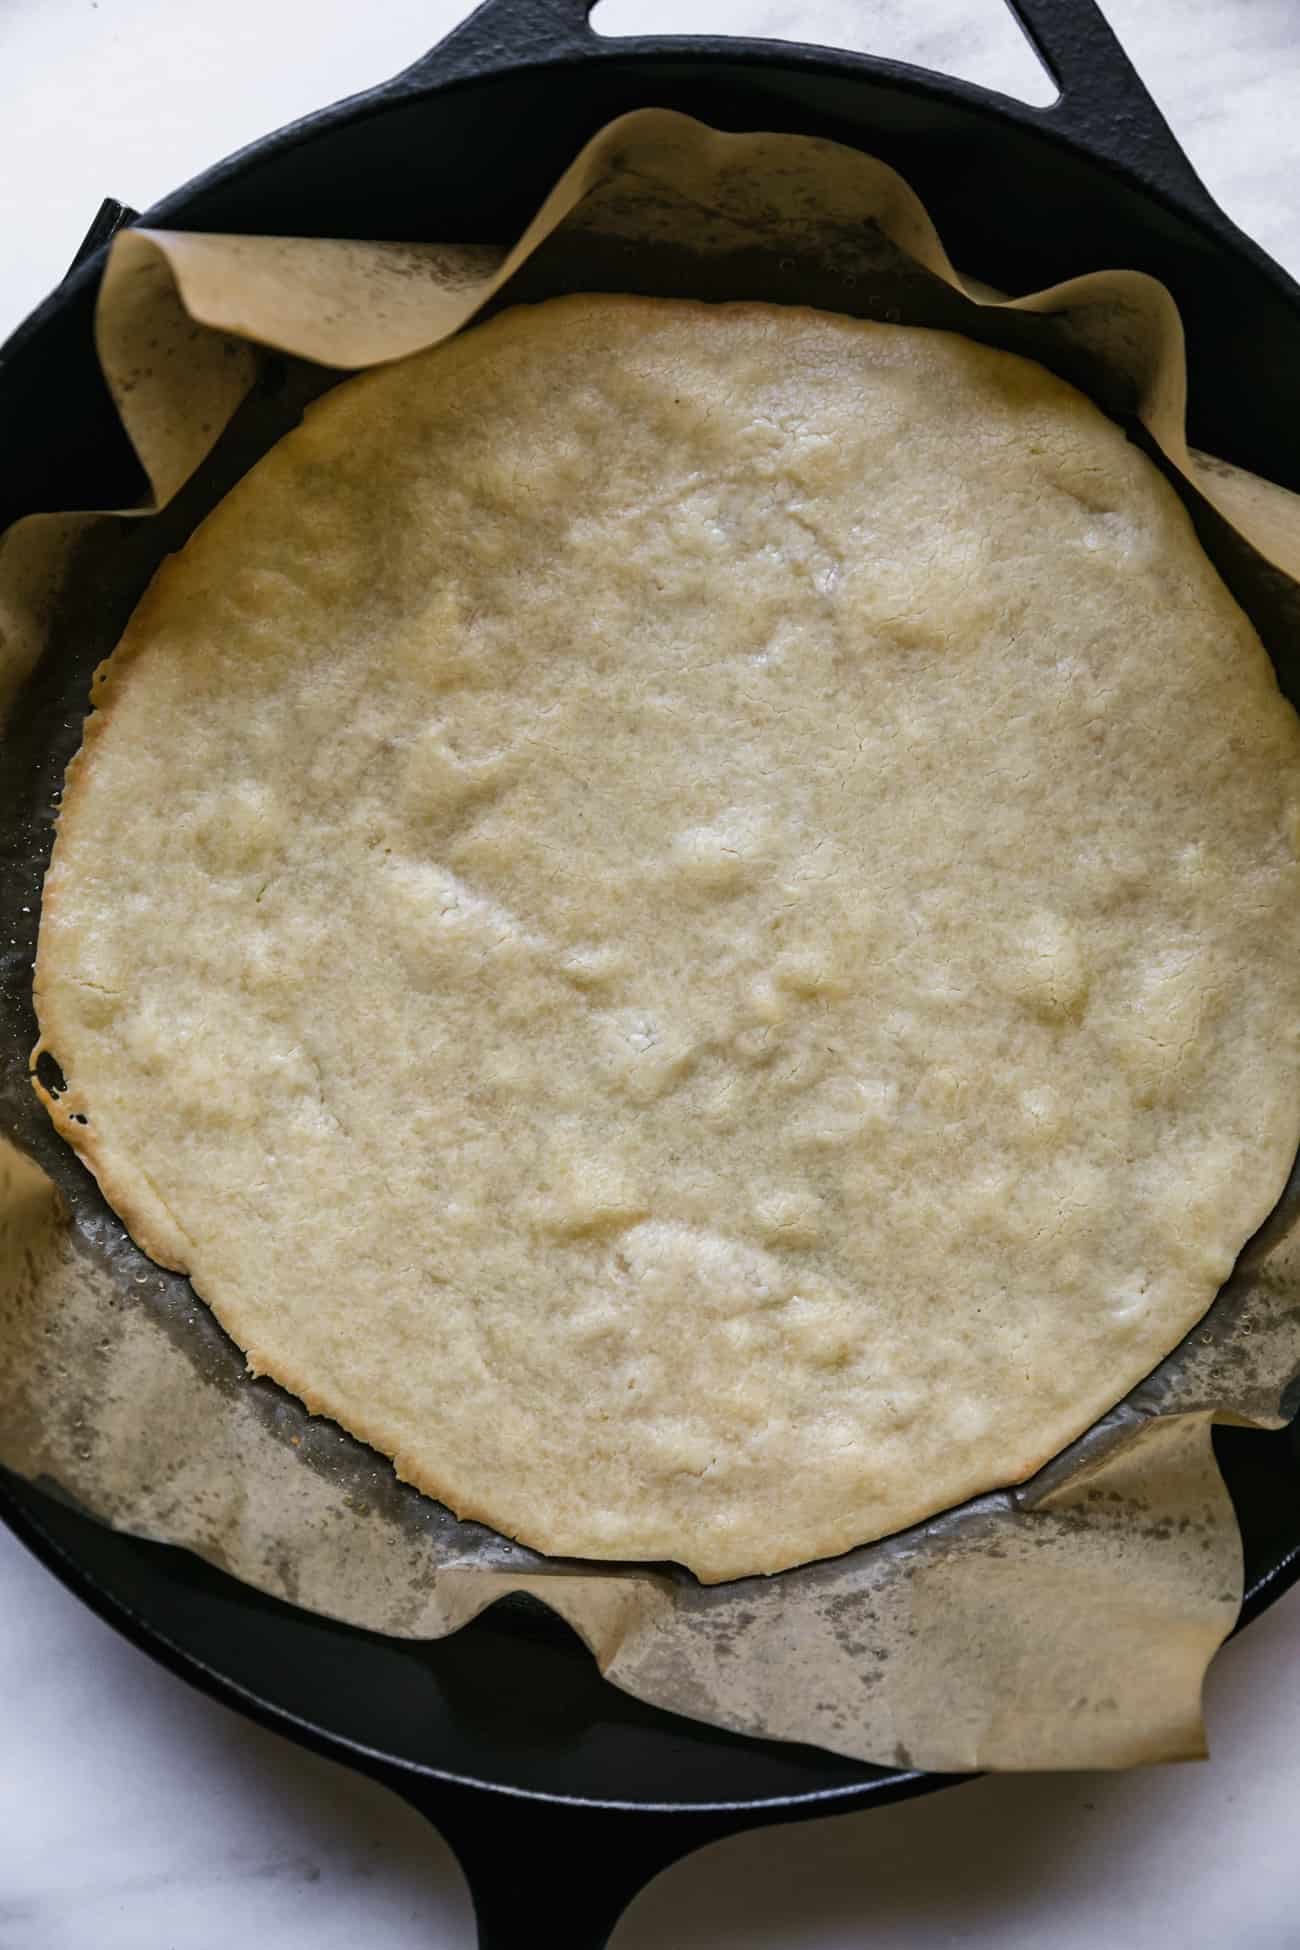 cooked gluten free pizza dough in a cast iron pan with parchment paper